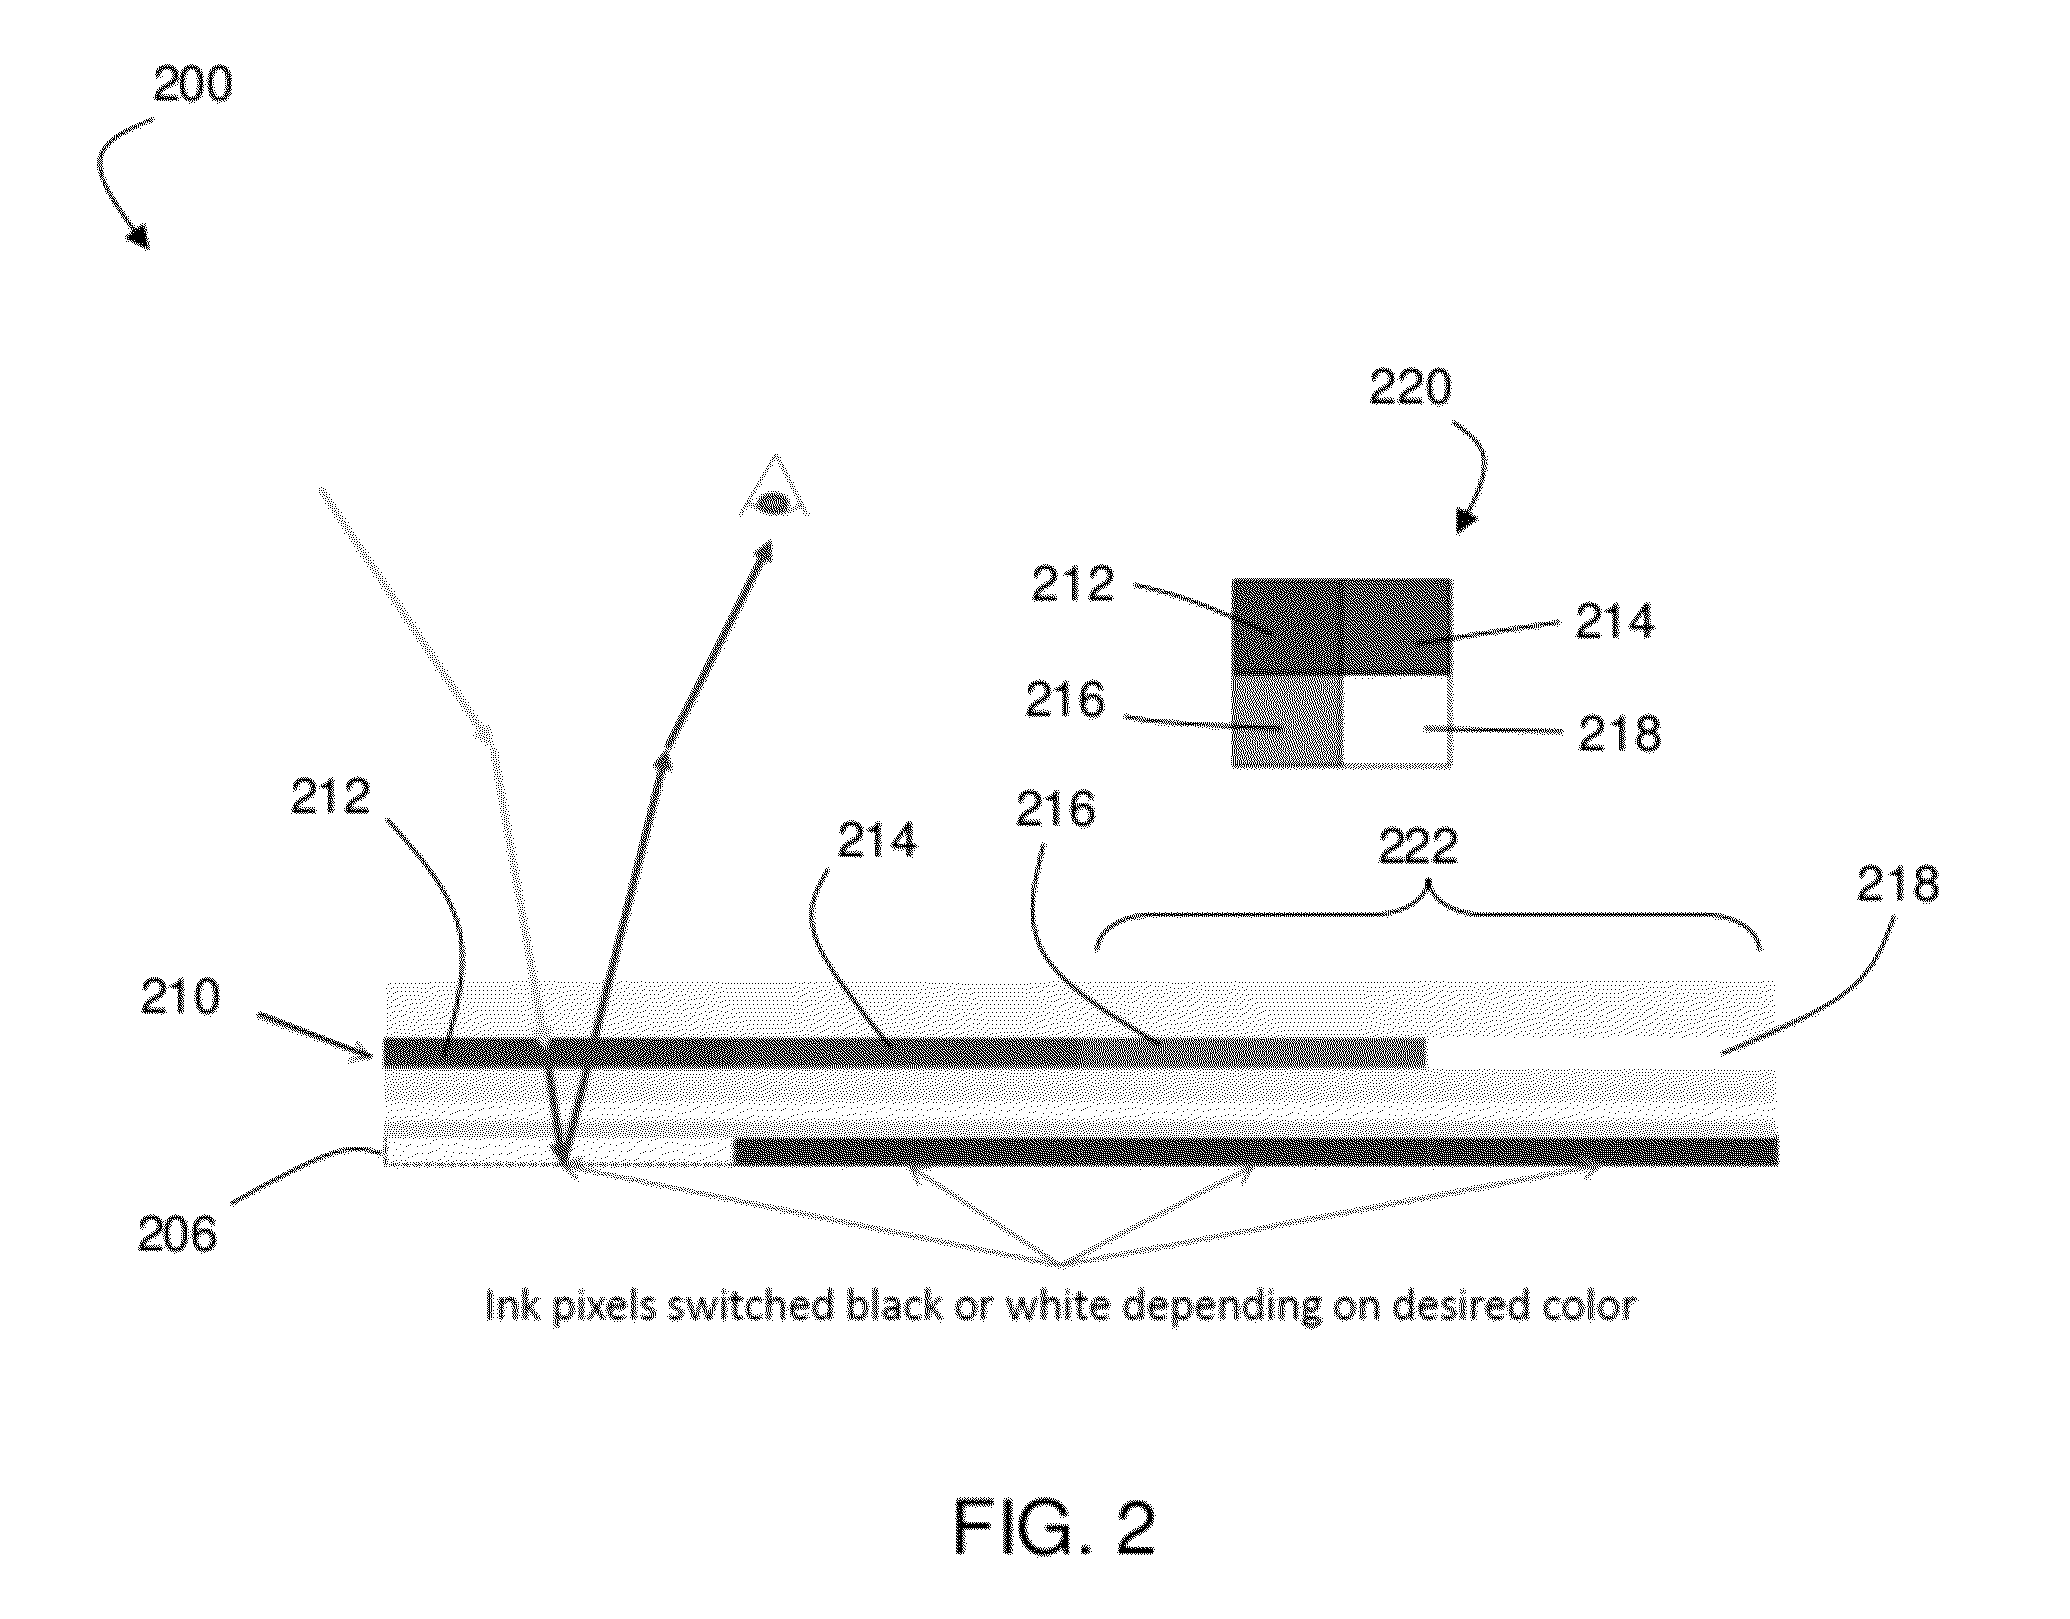 Tetrachromatic color filter array for reflective display